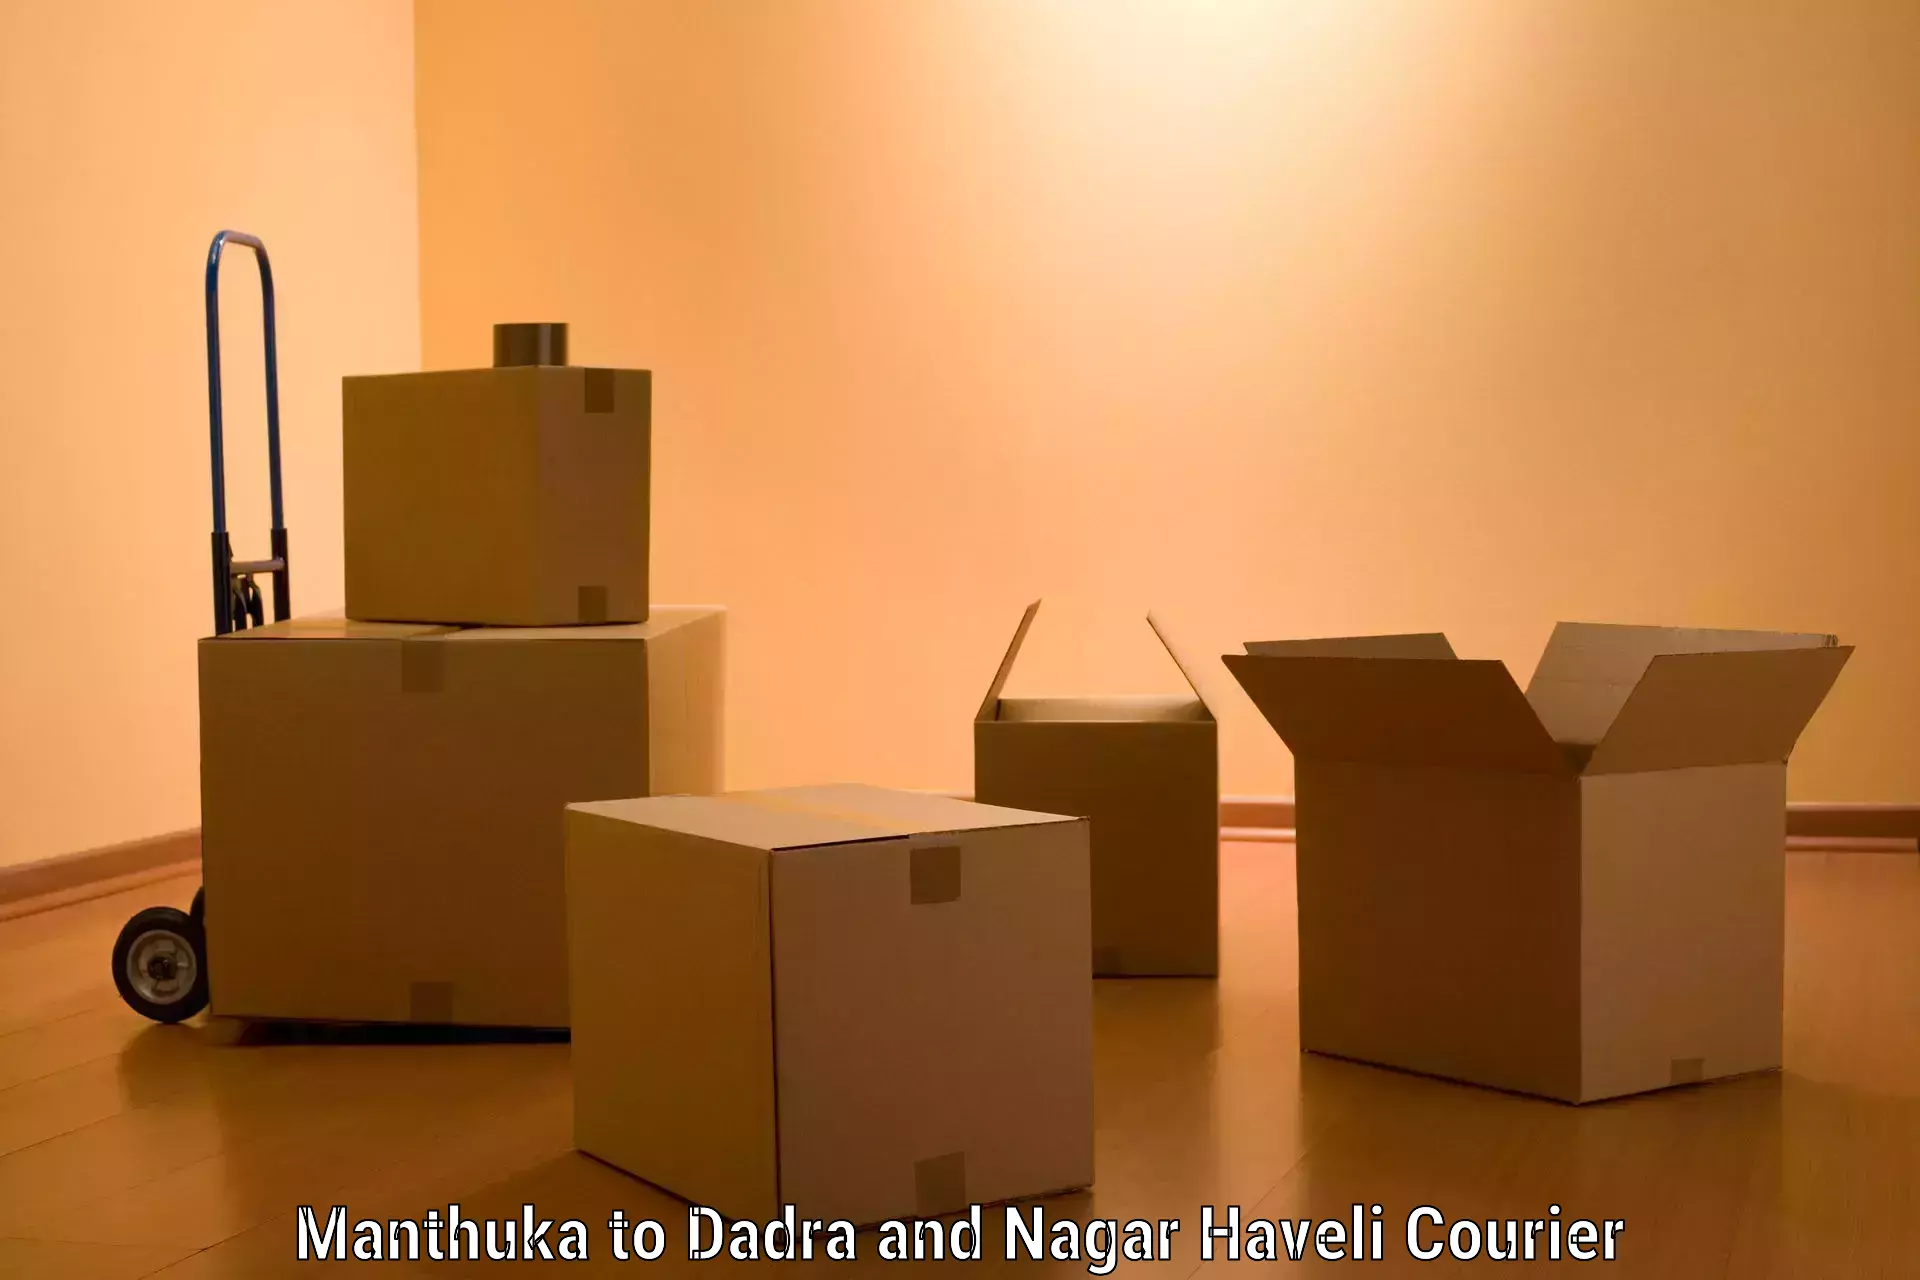 Customized relocation services in Manthuka to Dadra and Nagar Haveli